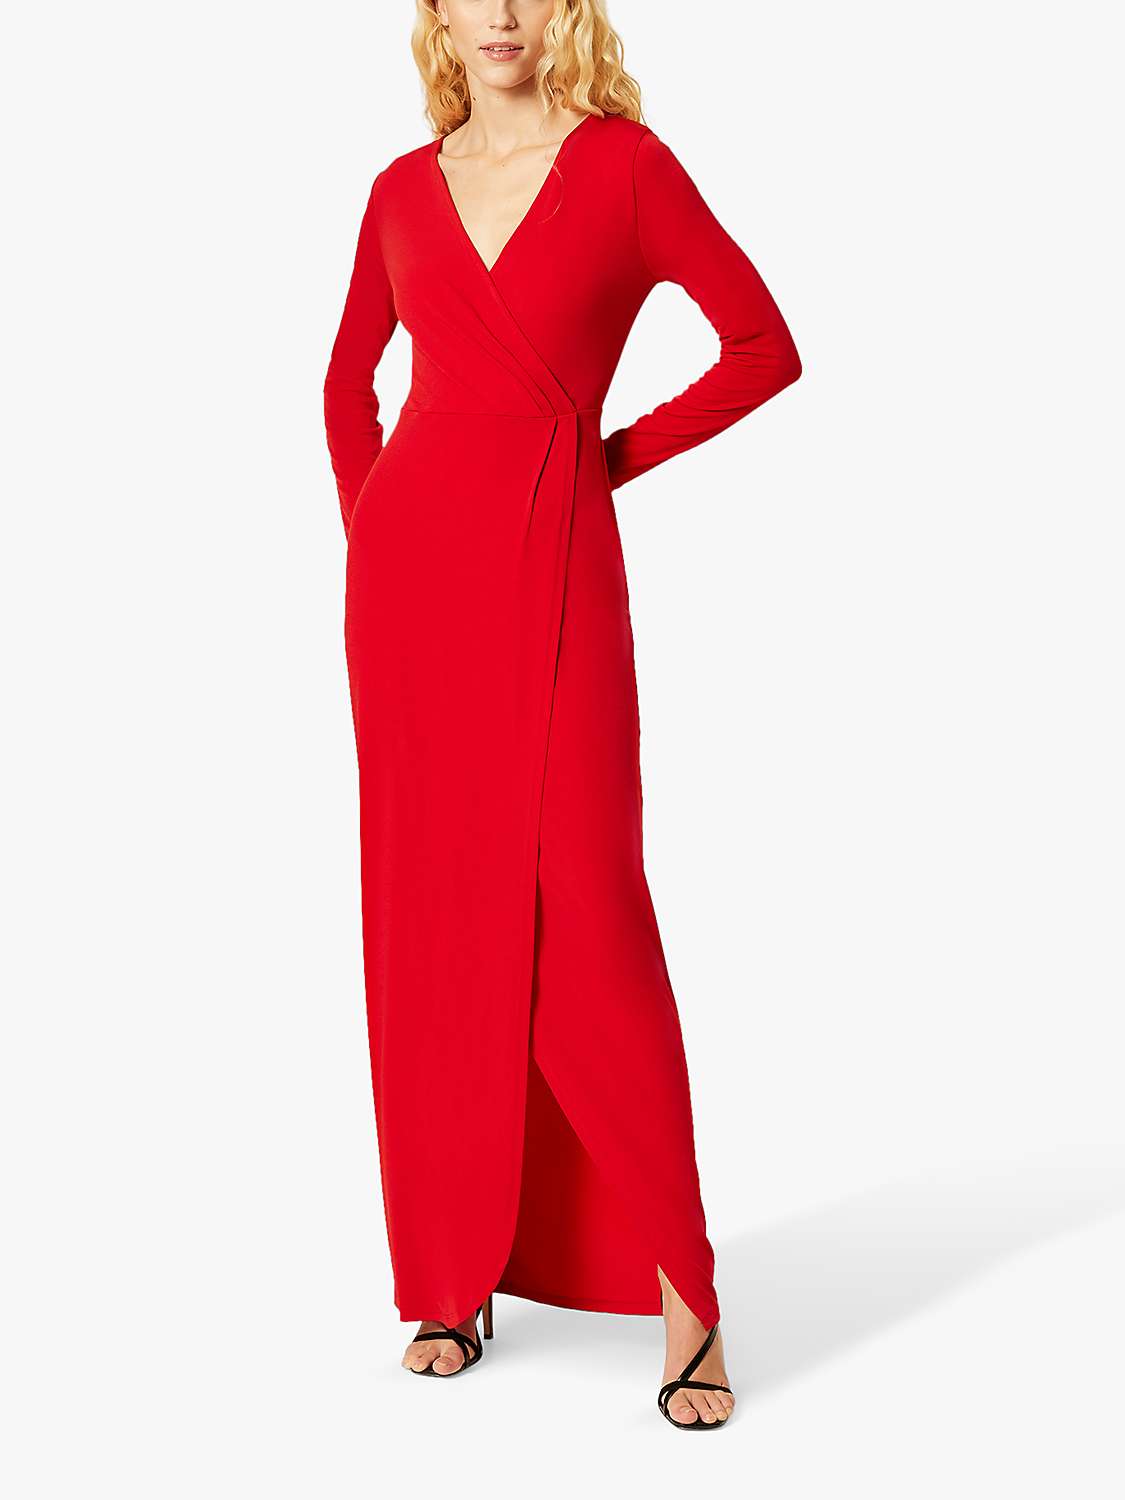 Buy French Connection Slinky Split Maxi Dress Online at johnlewis.com